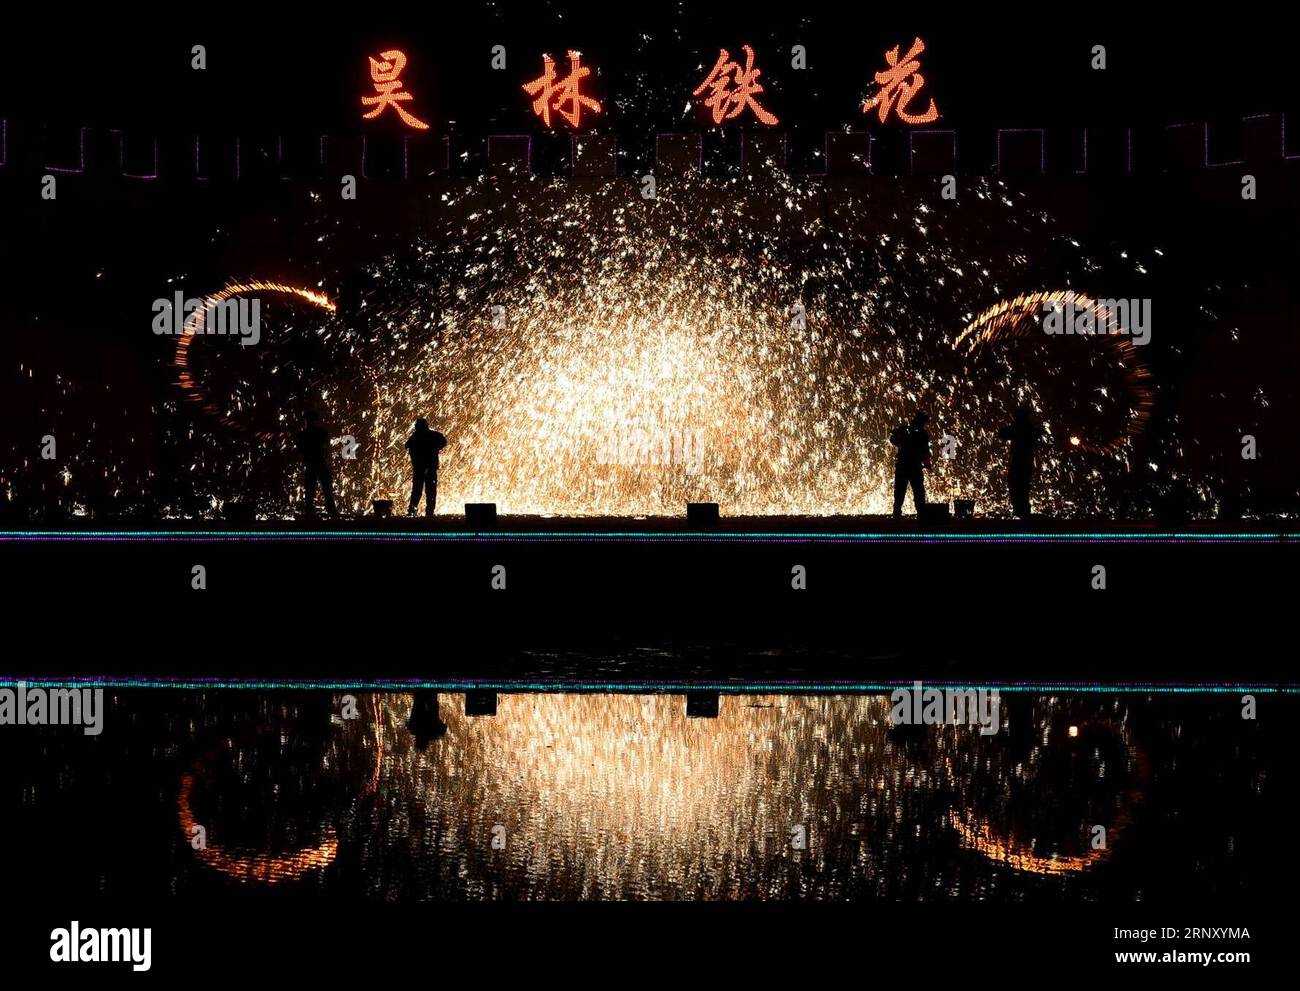 (180218) -- SHIJIAZHUANG, Feb. 18, 2018 -- Sparks pour down as performers spray burning iron chips to shower sparks-like fireworks in Cixian County, north China s Hebei Province, Feb. 17, 2018. The performance was held to celebrate the Spring Festival, or the Chinese Lunar New Year, which fell on Feb. 16 this year. ) (ry) CHINA-HEBEI-IRON SPARKS (CN) WangxXiao PUBLICATIONxNOTxINxCHN Stock Photo